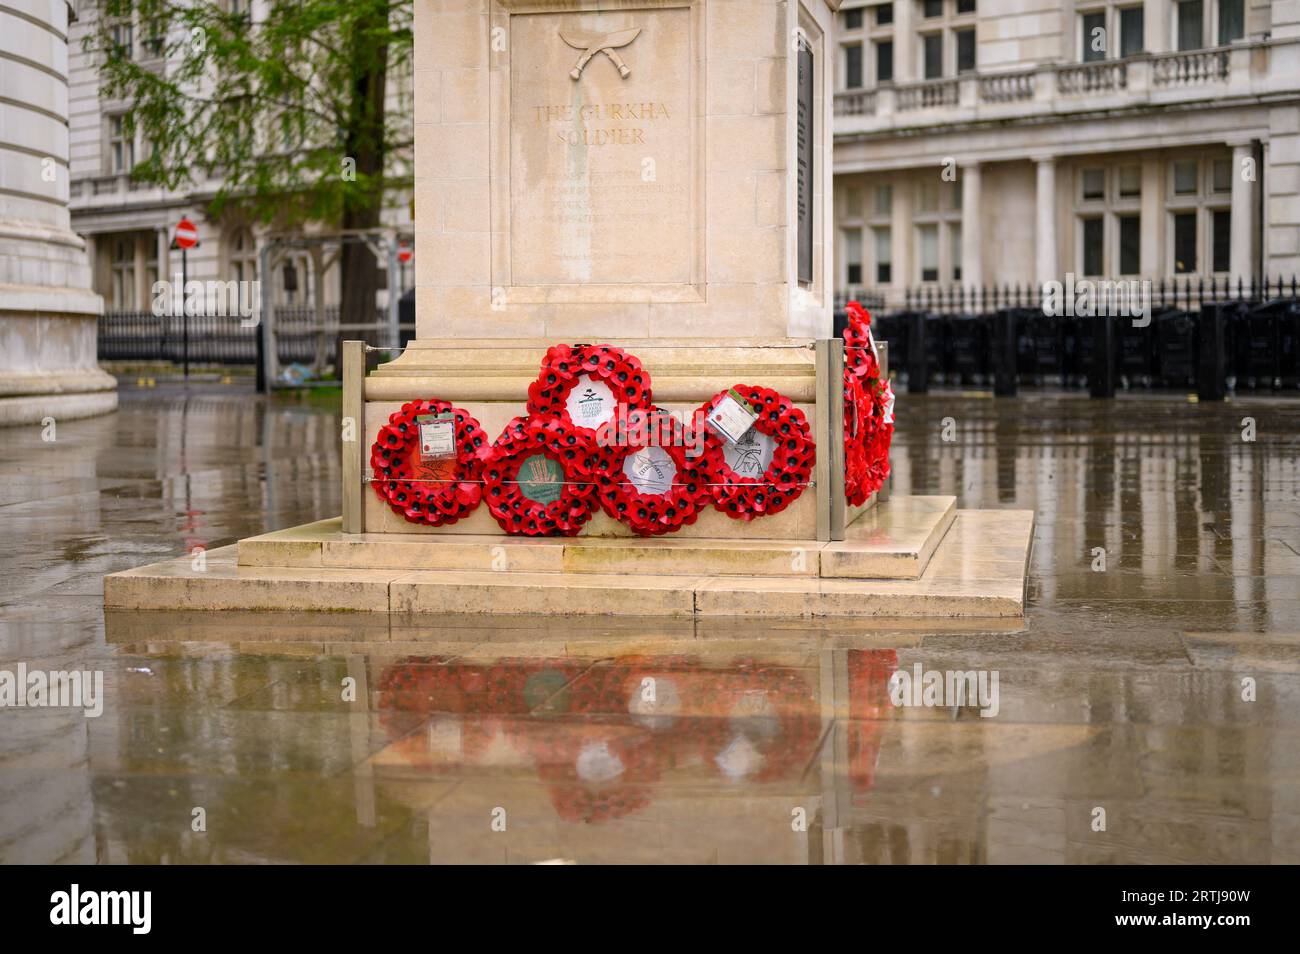 LONDON - April 24, 2023: Red poppy wreaths at the base of the Gurkha soldier statue with reflections on the wet pavement create a poignant scene outsi Stock Photo